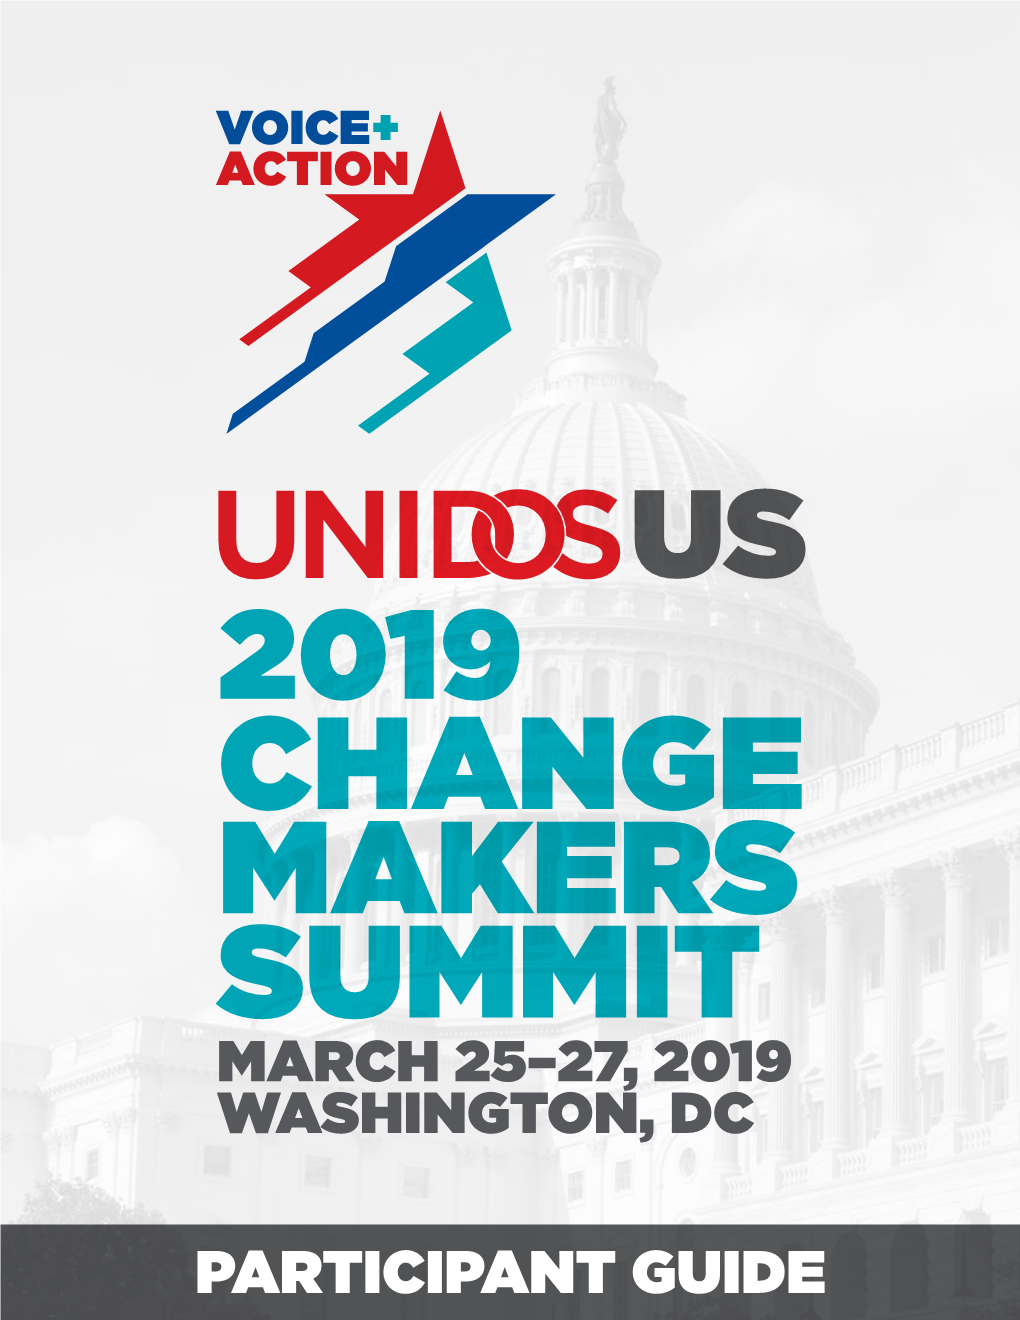 PARTICIPANT GUIDE Unidosus, Previously Known As NCLR (National Council of La Raza), Is the Nation’S Largest Hispanic Civil Rights and Advocacy Organization